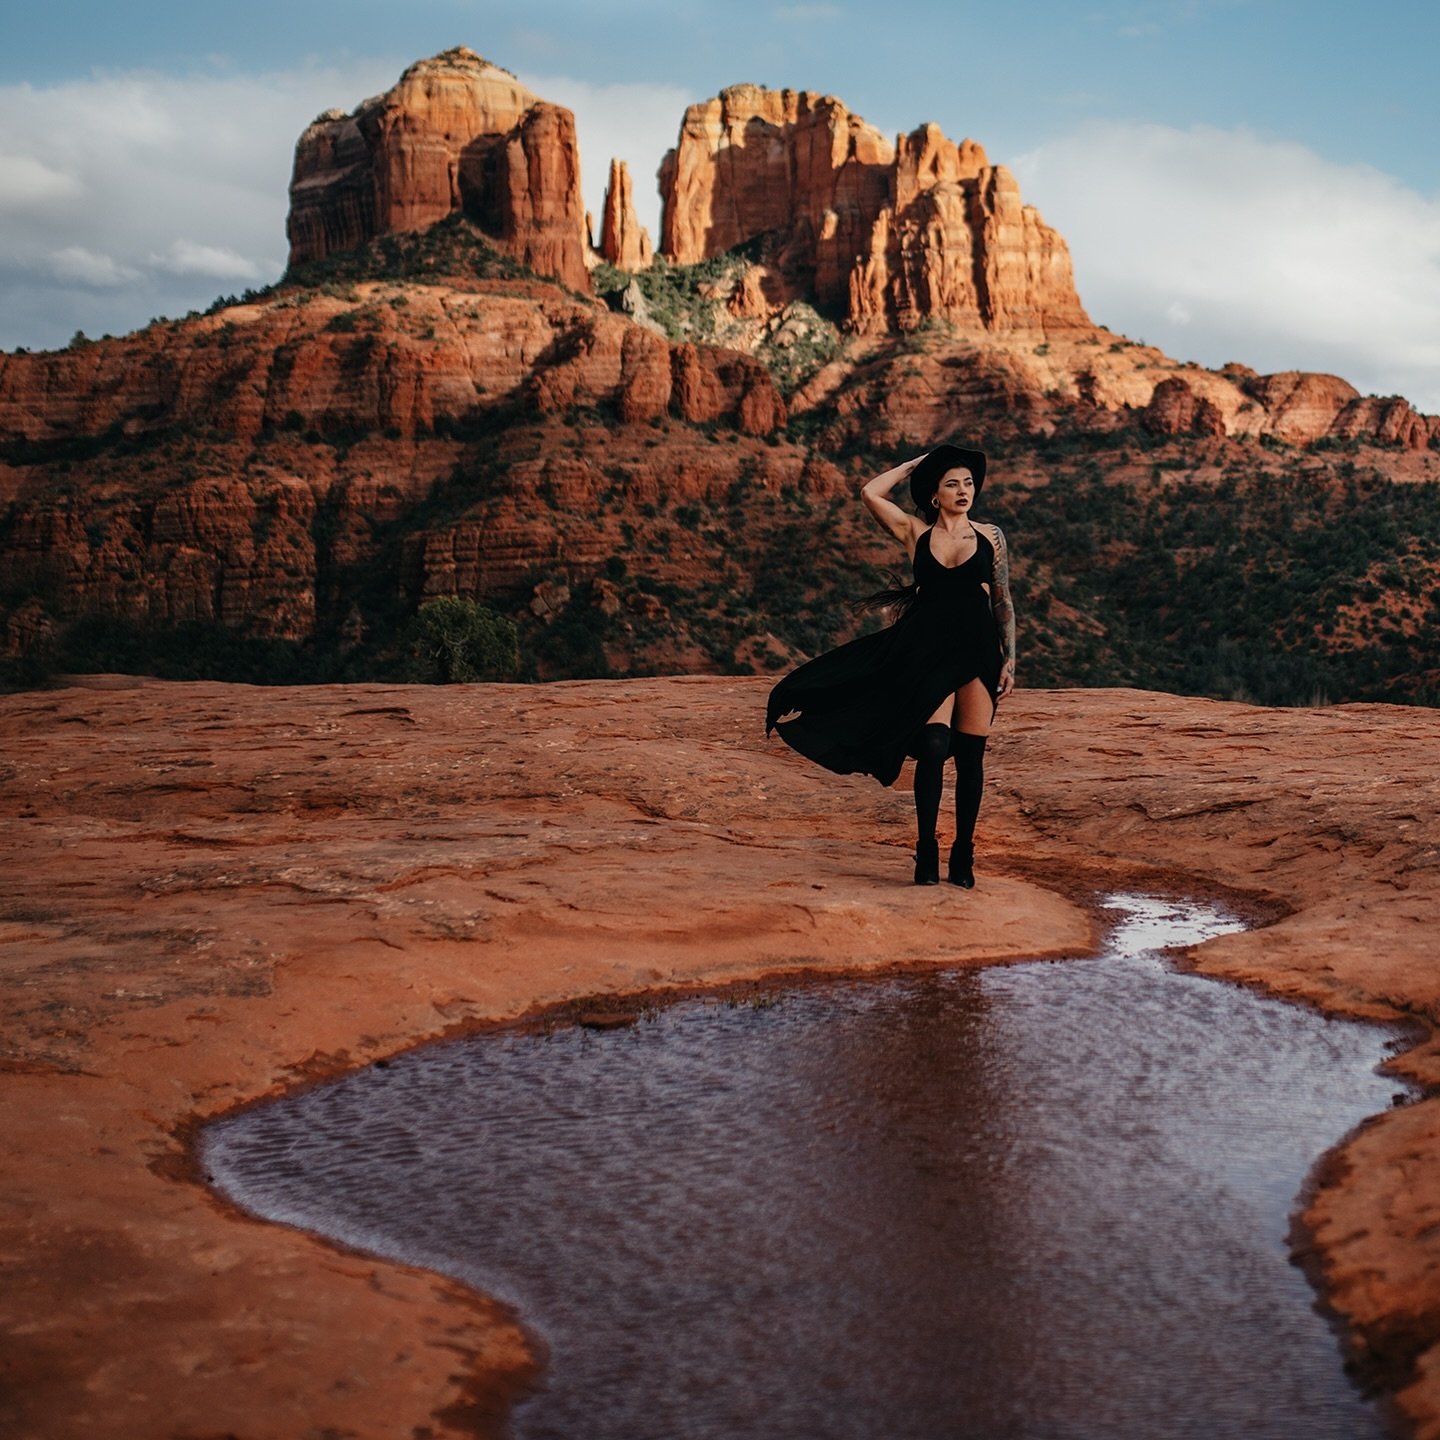 ✨Follow your heart✨
Two months from now I&rsquo;ll be photographing a wedding in Sun River Oregon. So I&rsquo;m pulling up stakes in Sedona June 13th.
Less than two months left to grab me for your Sedona photoshoot friends! 
I love it here, and I lov